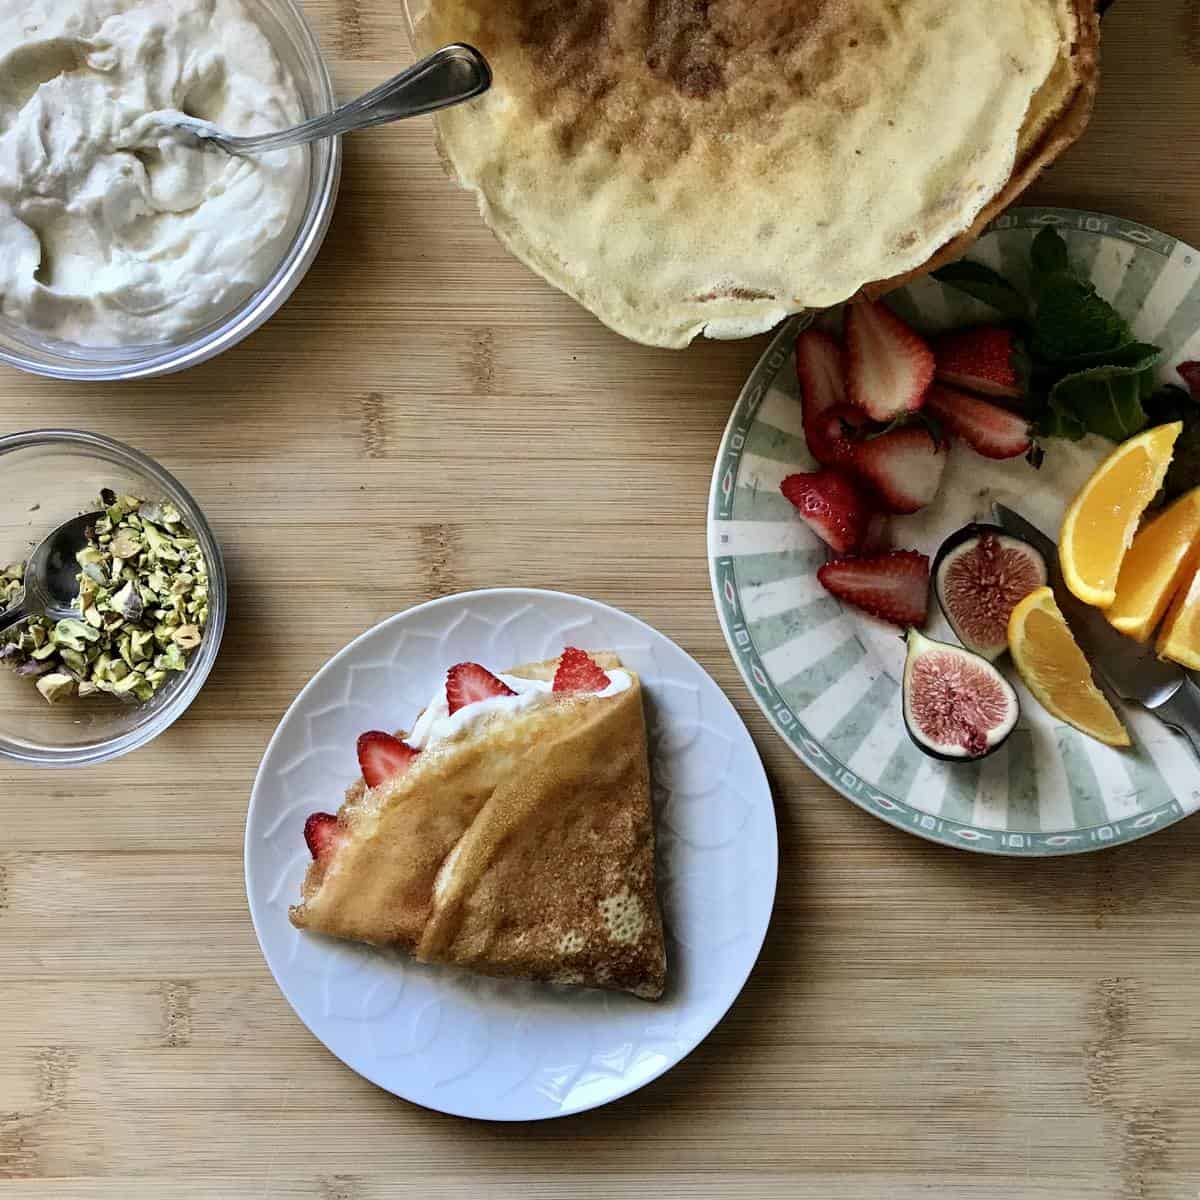 A ricotta filled crepe in a white plate.